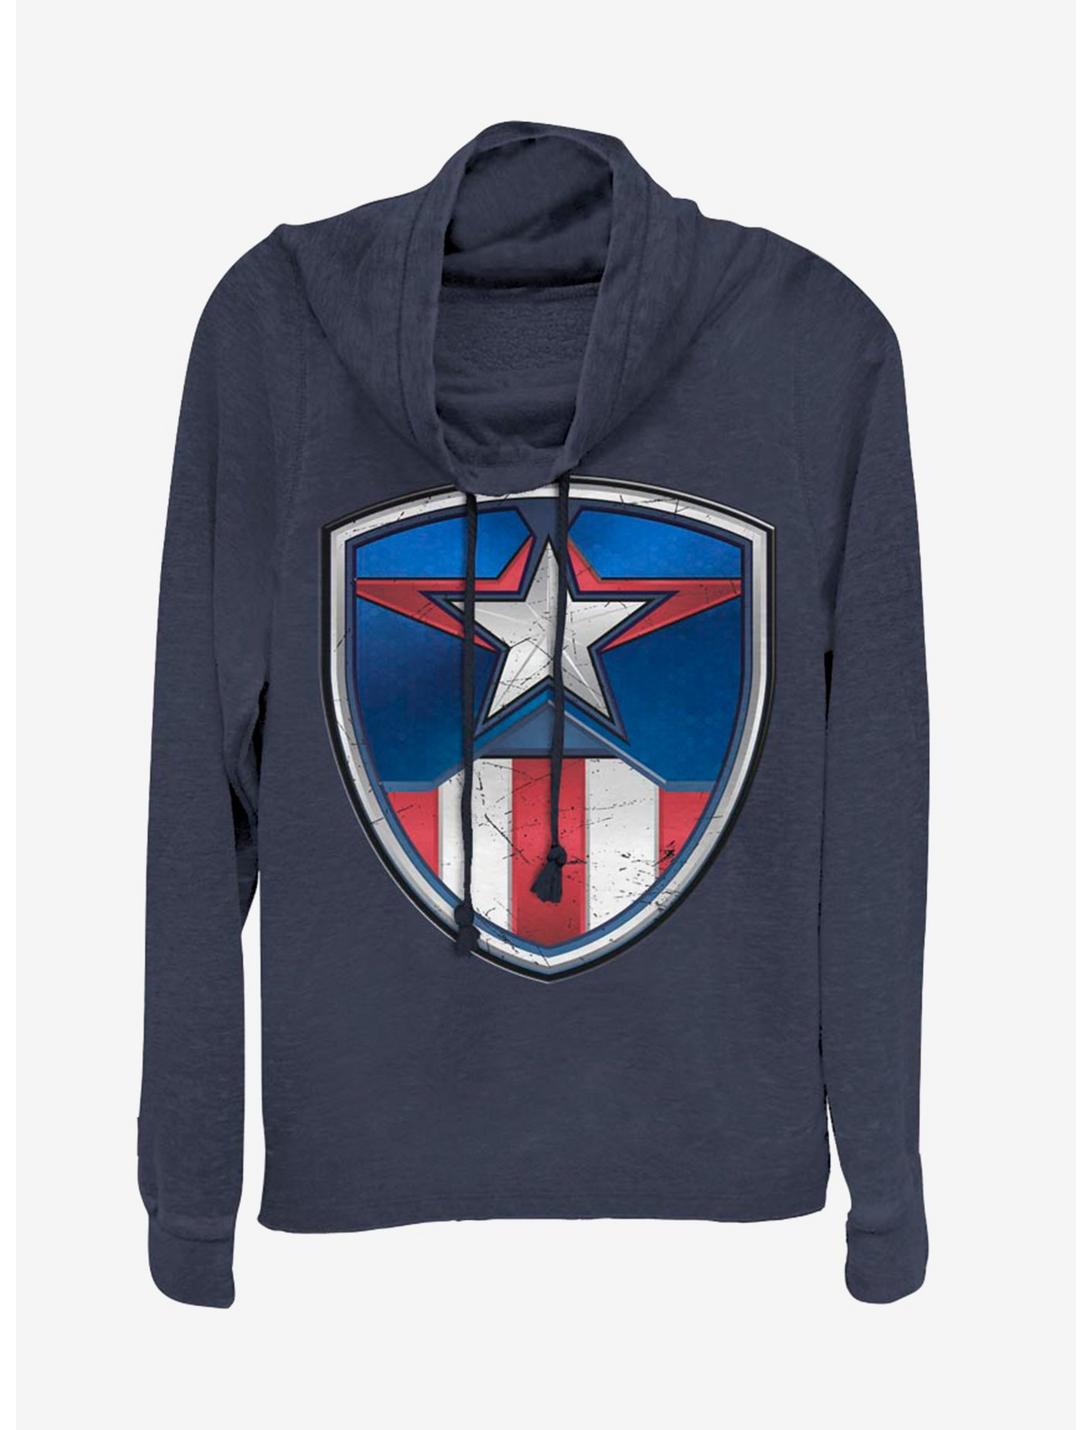 Marvel Captain America Classic Shield Crest Cowlneck Long-Sleeve Womens Top, NAVY, hi-res